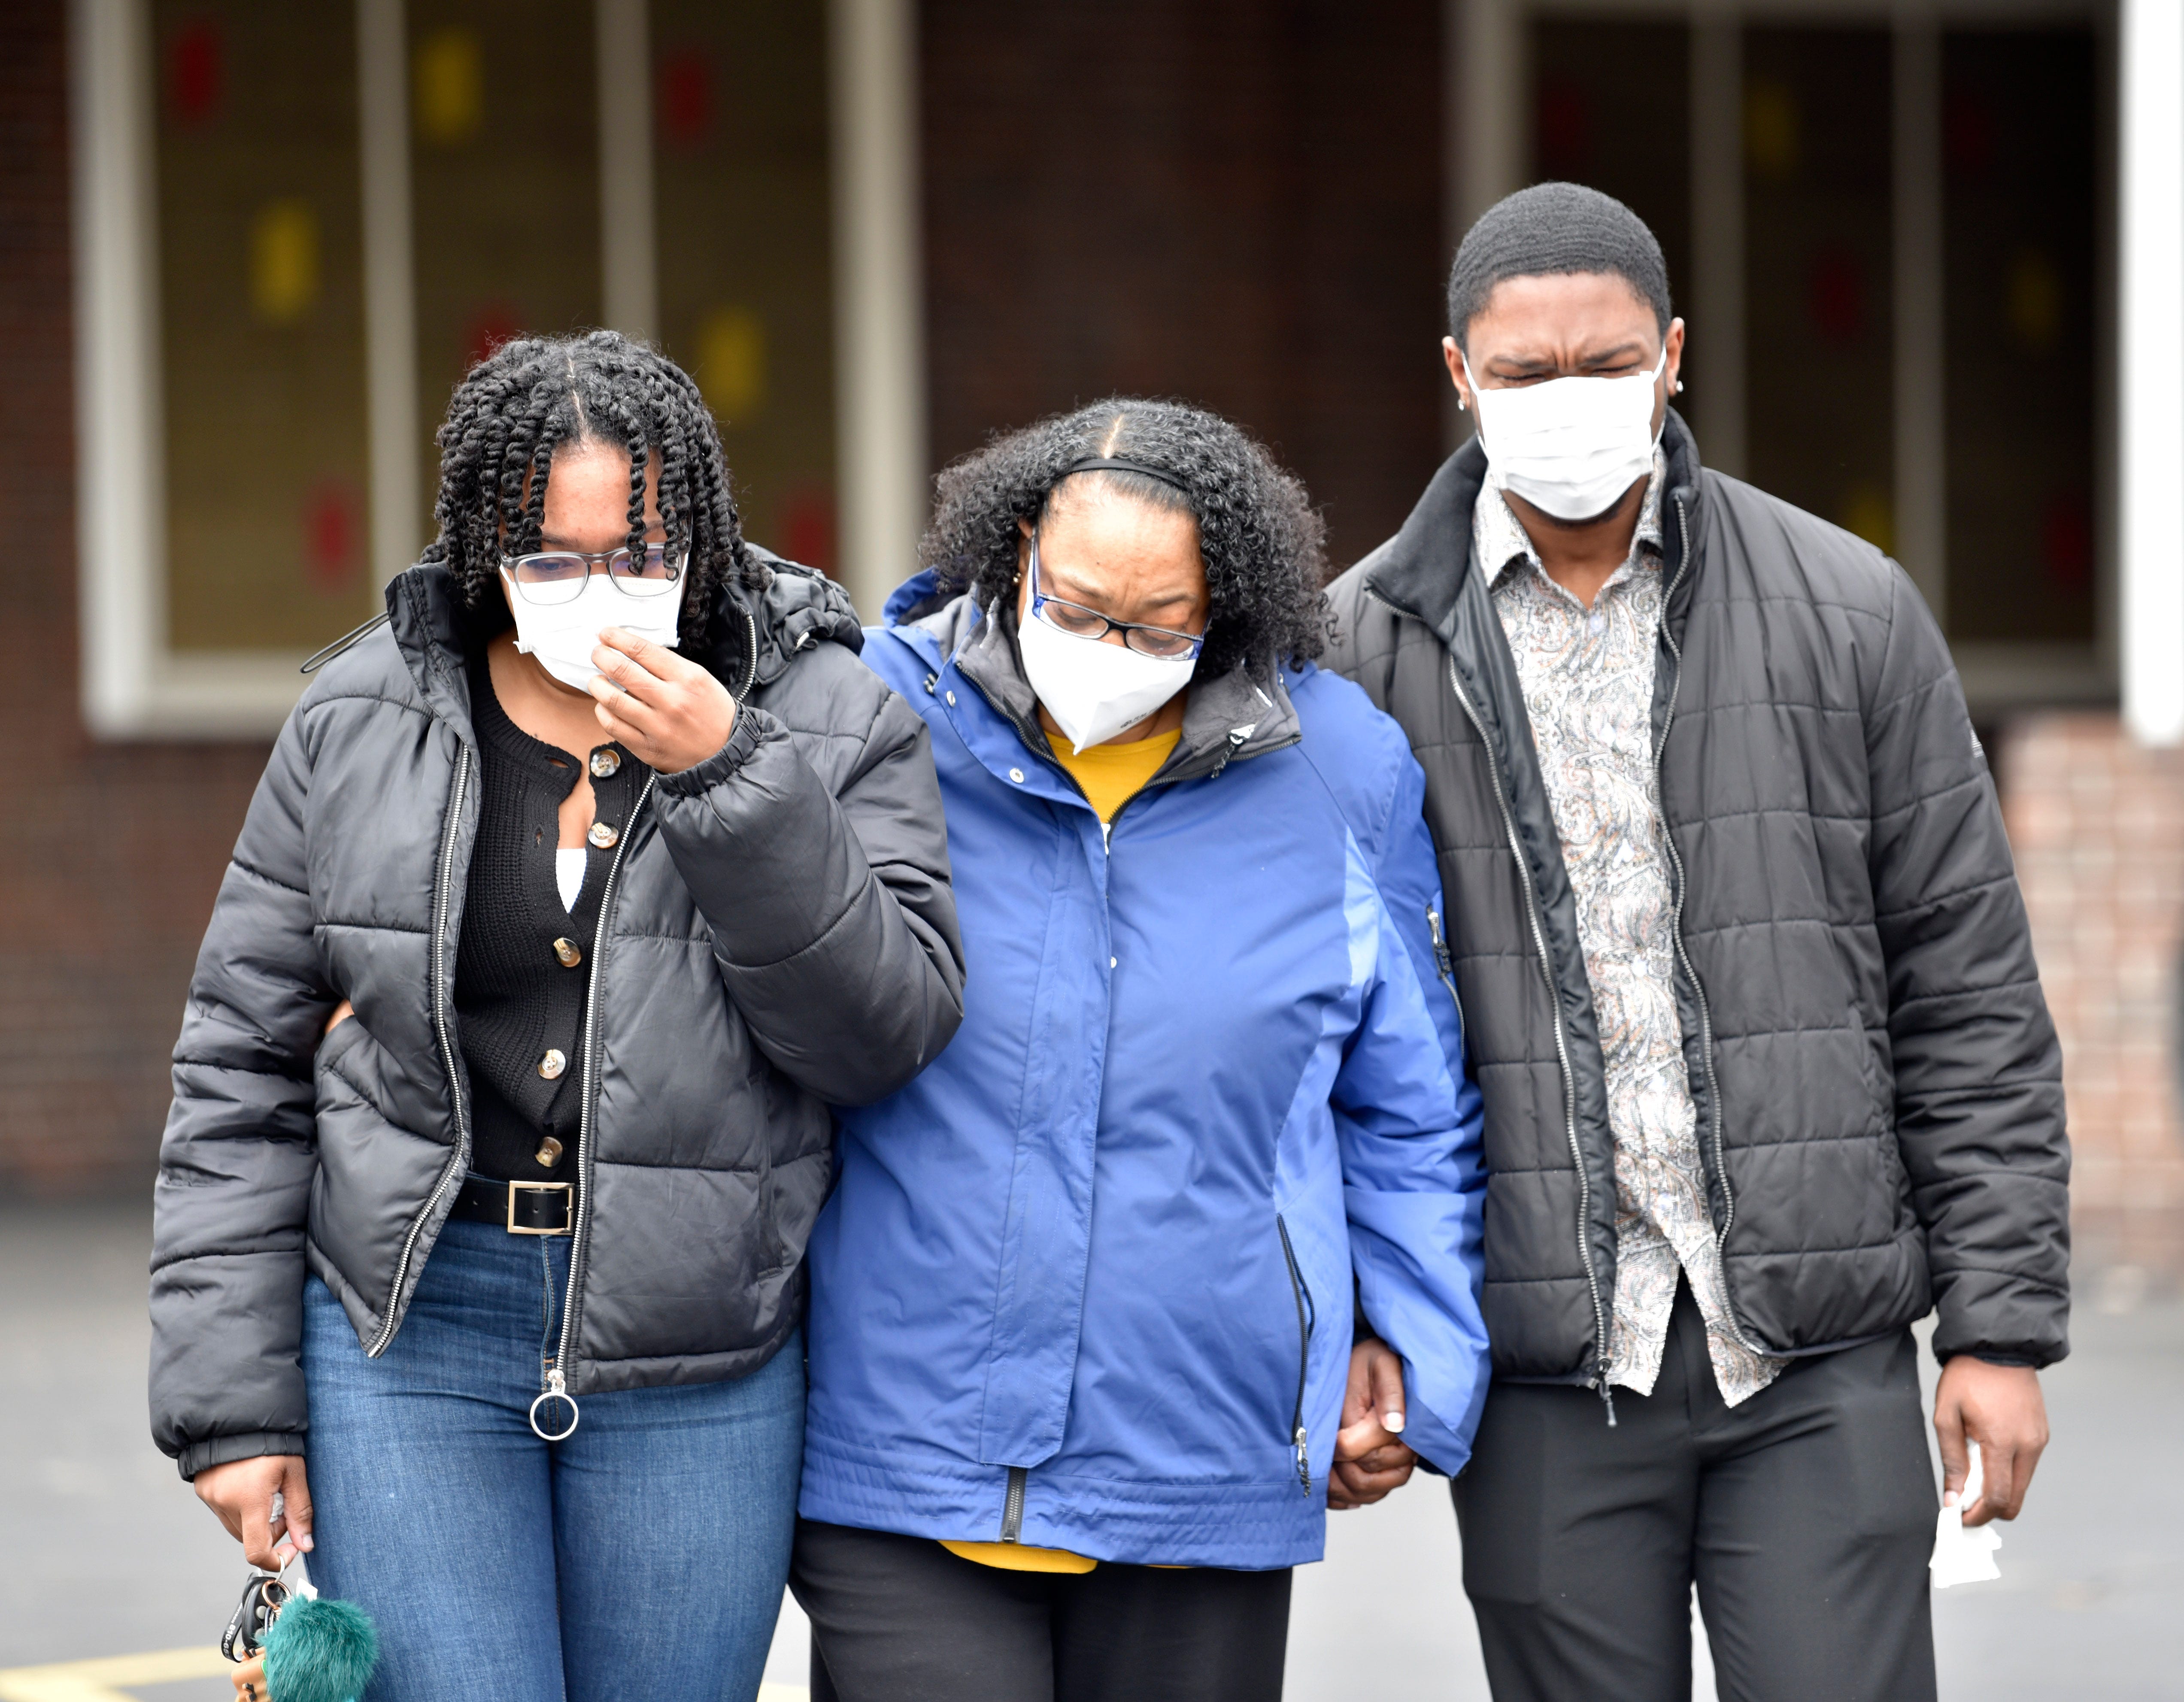 Tonya Brown, center, and her children, Rochelle Pompey, and Ronnie Pompey, Jr., all of Flint, cry as they leave the funeral home. Brown is sister to Brown Jr. and aunt to Brown III.